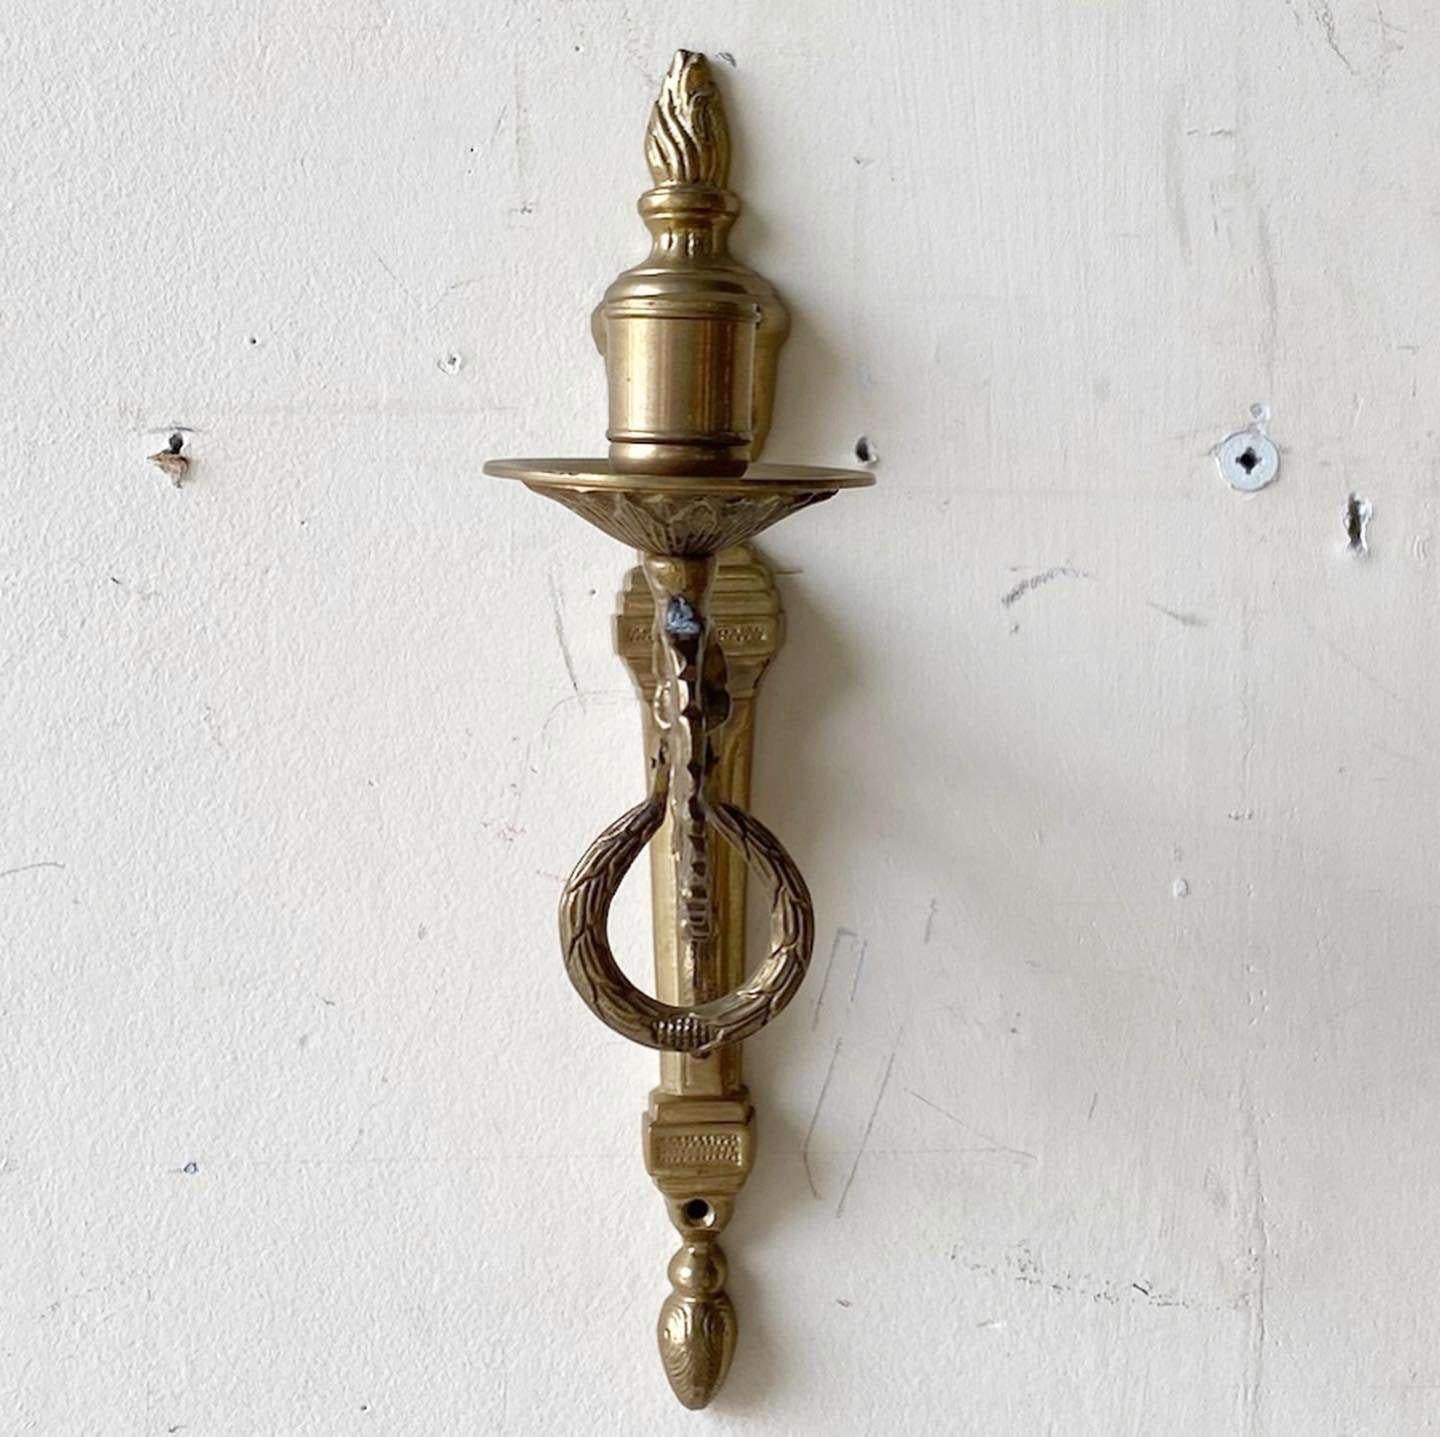 Amazing vintage IKEA wall sconce candle holder. Features an ornate design.
